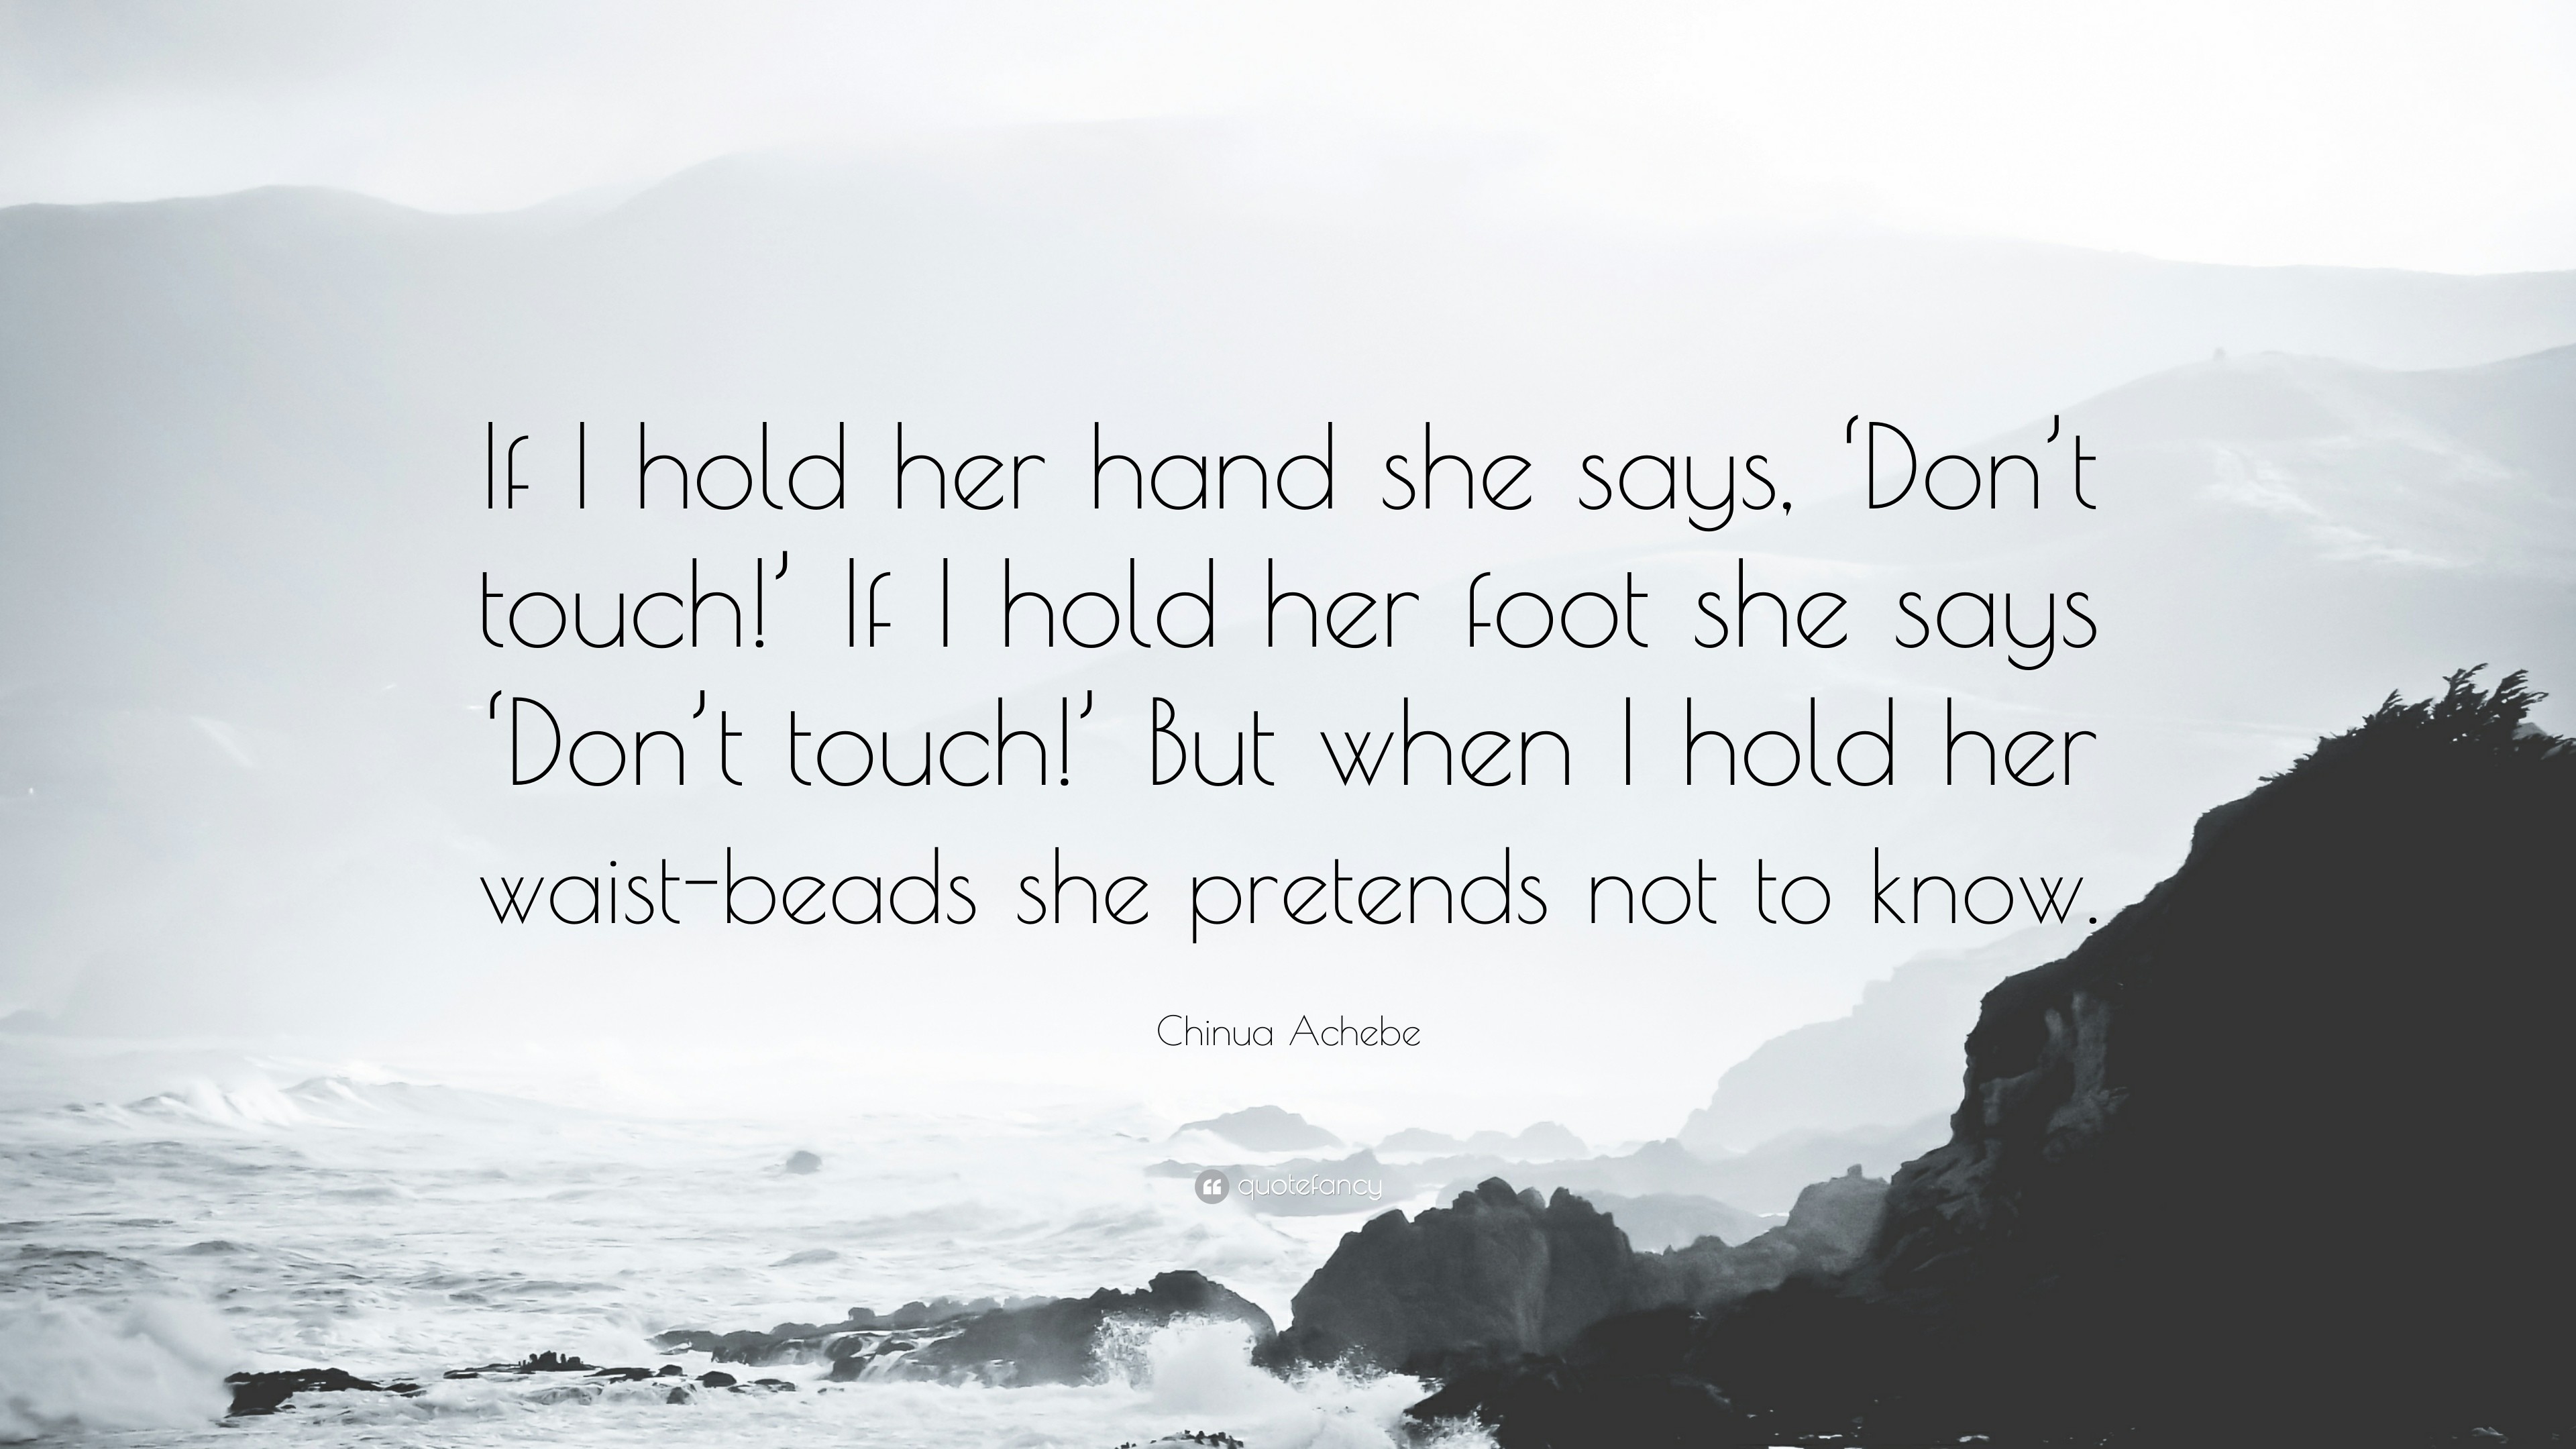 3840x2160 Chinua Achebe Quote: “If I hold her hand she says, 'Don'